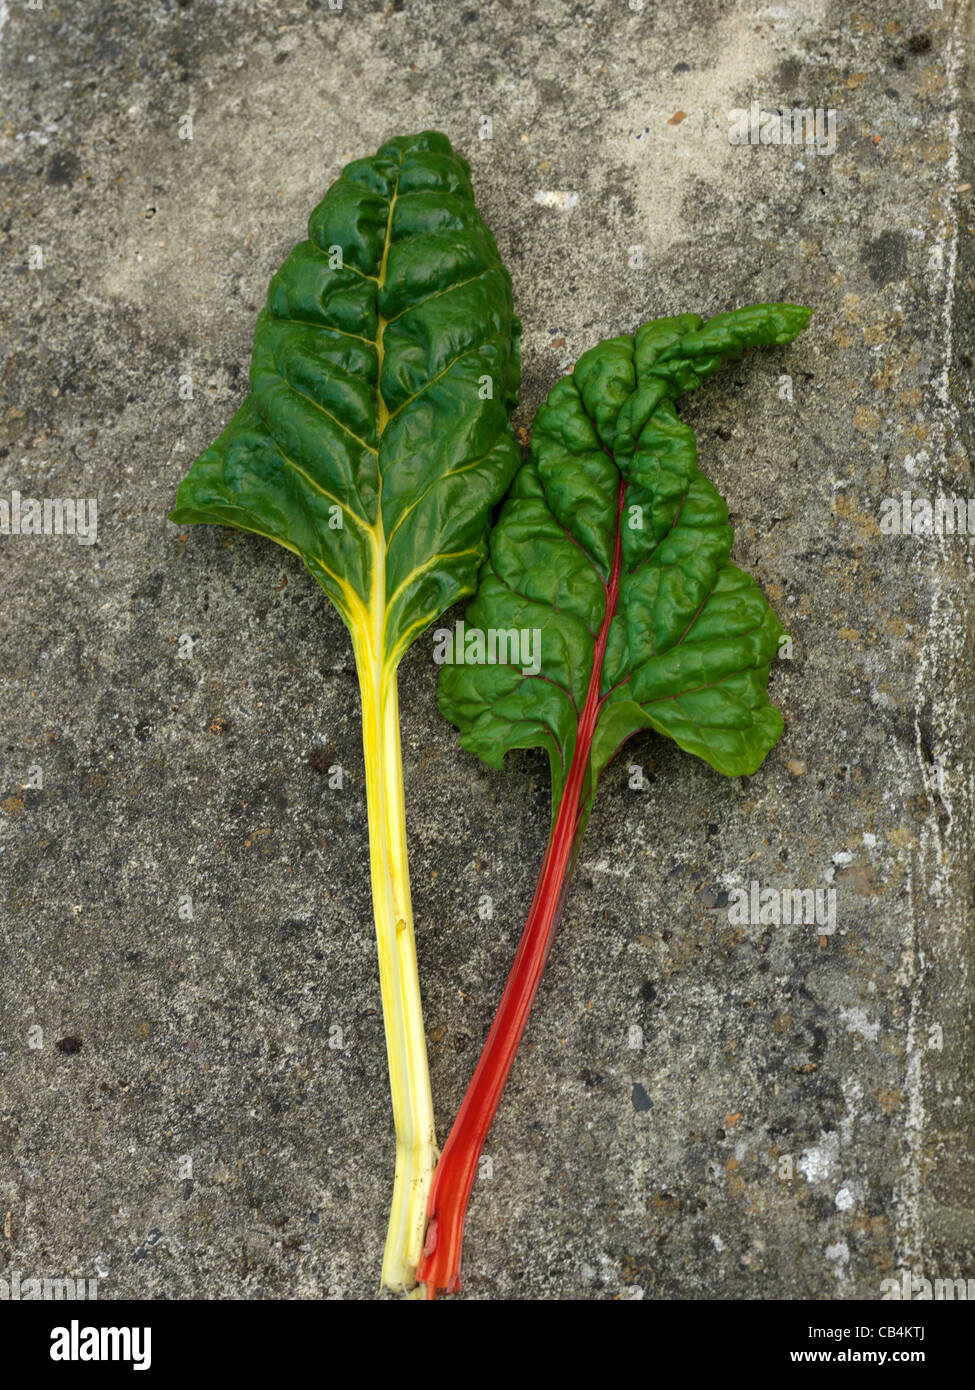 spinach beet or chard blite cote bette in melange yellow red white rose 200 seeds